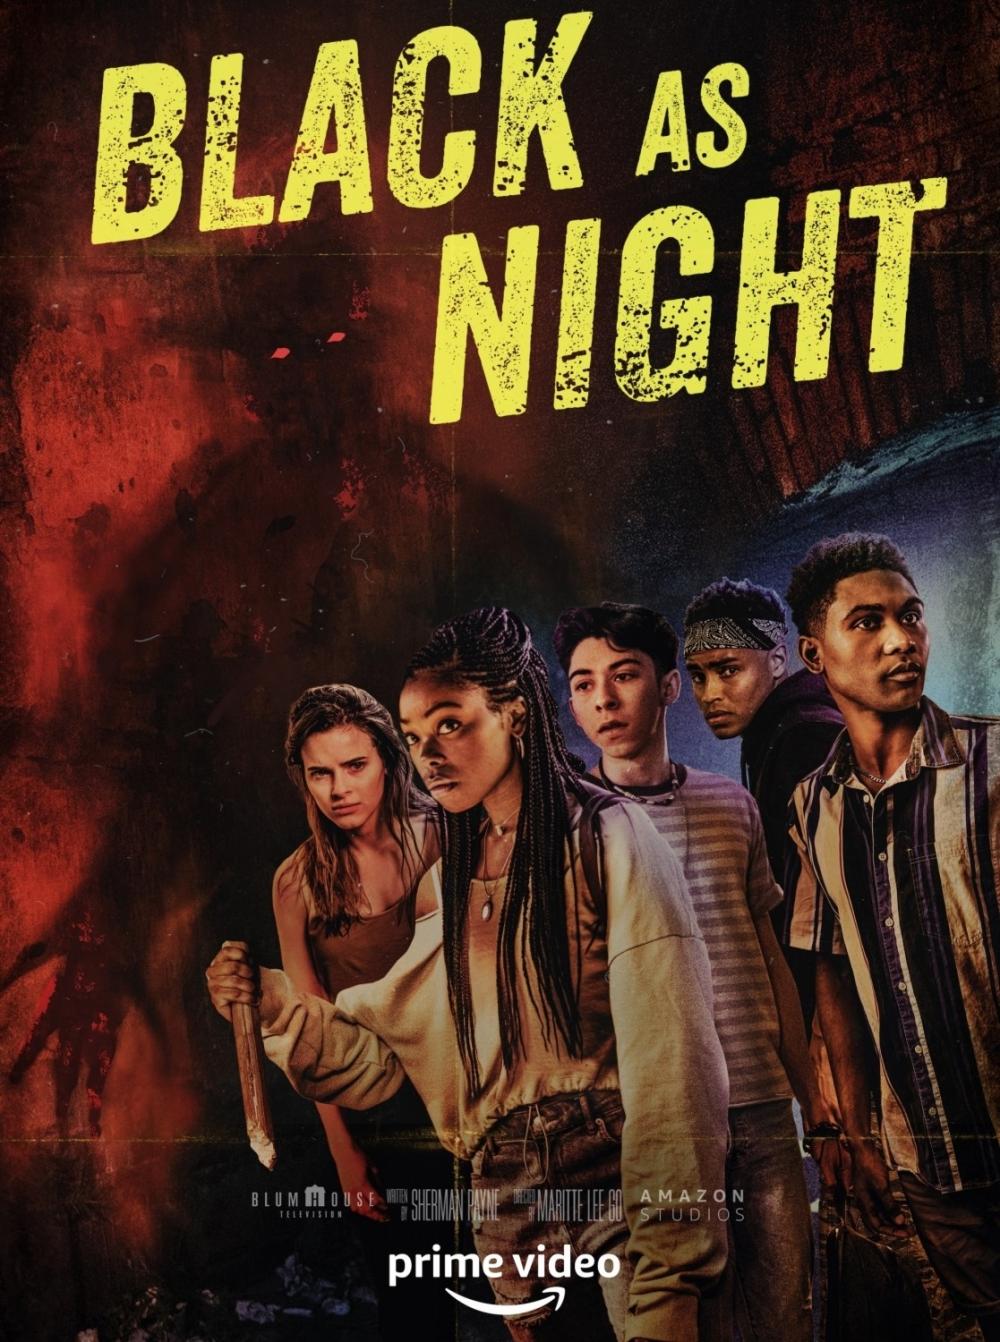 The Weekend Leader - As Black As Night': A comic-vampire film that tackles black community issues